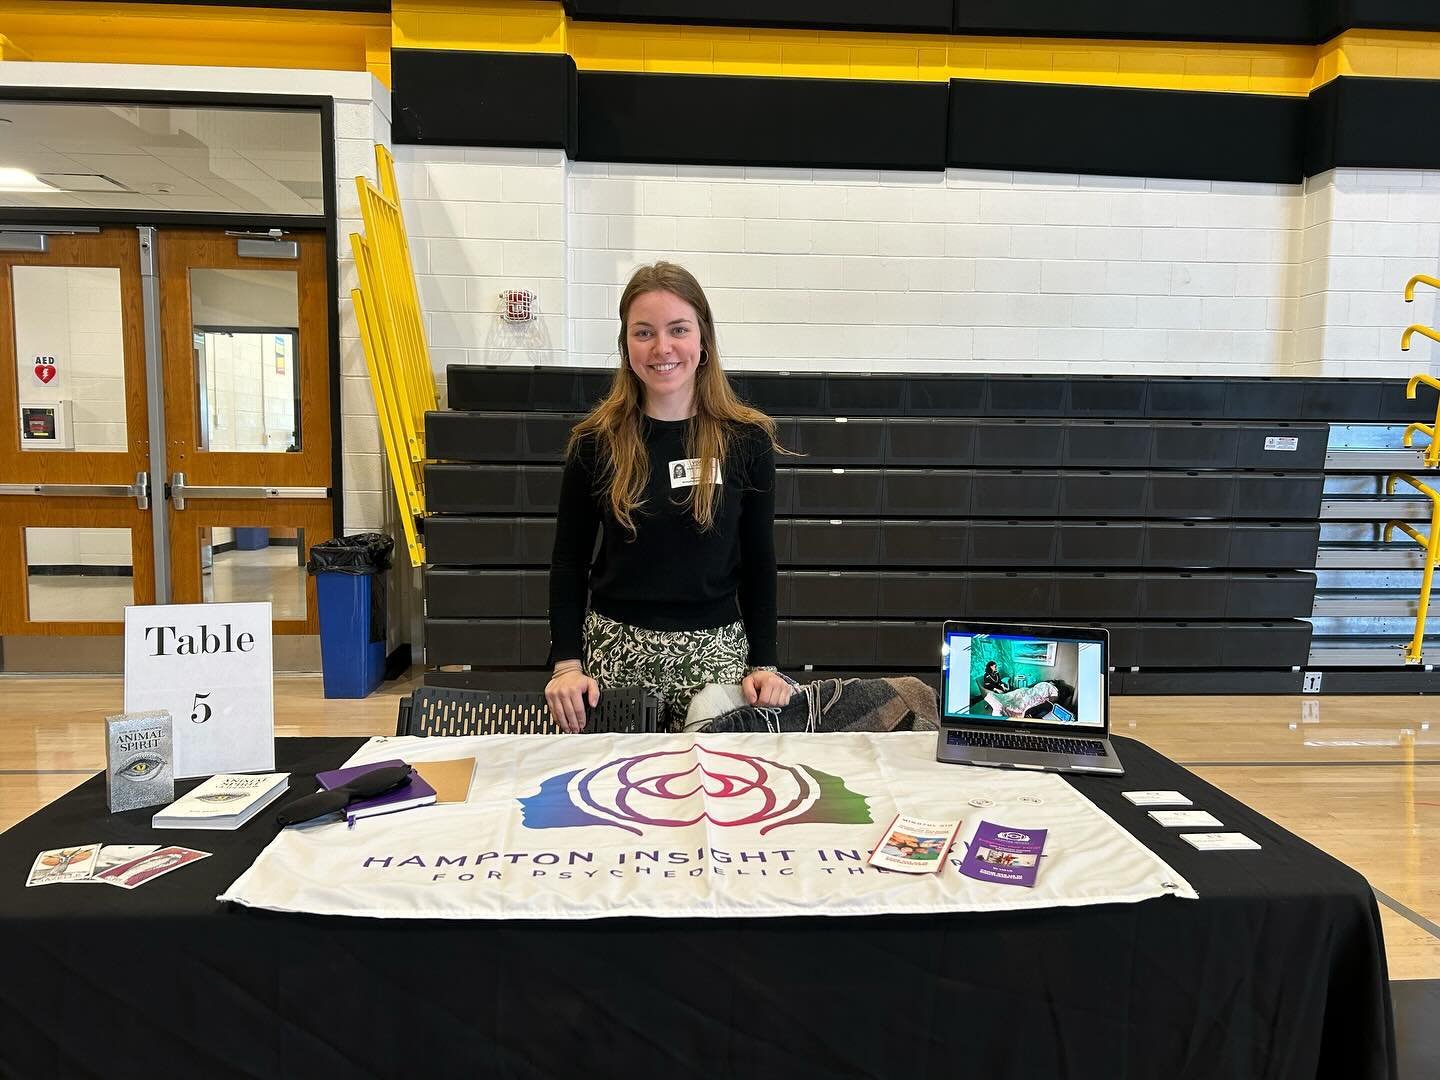 Exciting Day at Bridgehampton School!

Hey everyone! Beginning of April we had the honor of Amalia being a guest presenter at Bridgehampton School&rsquo;s career day! We had the incredible opportunity to talk about our innovative work in ketamine the